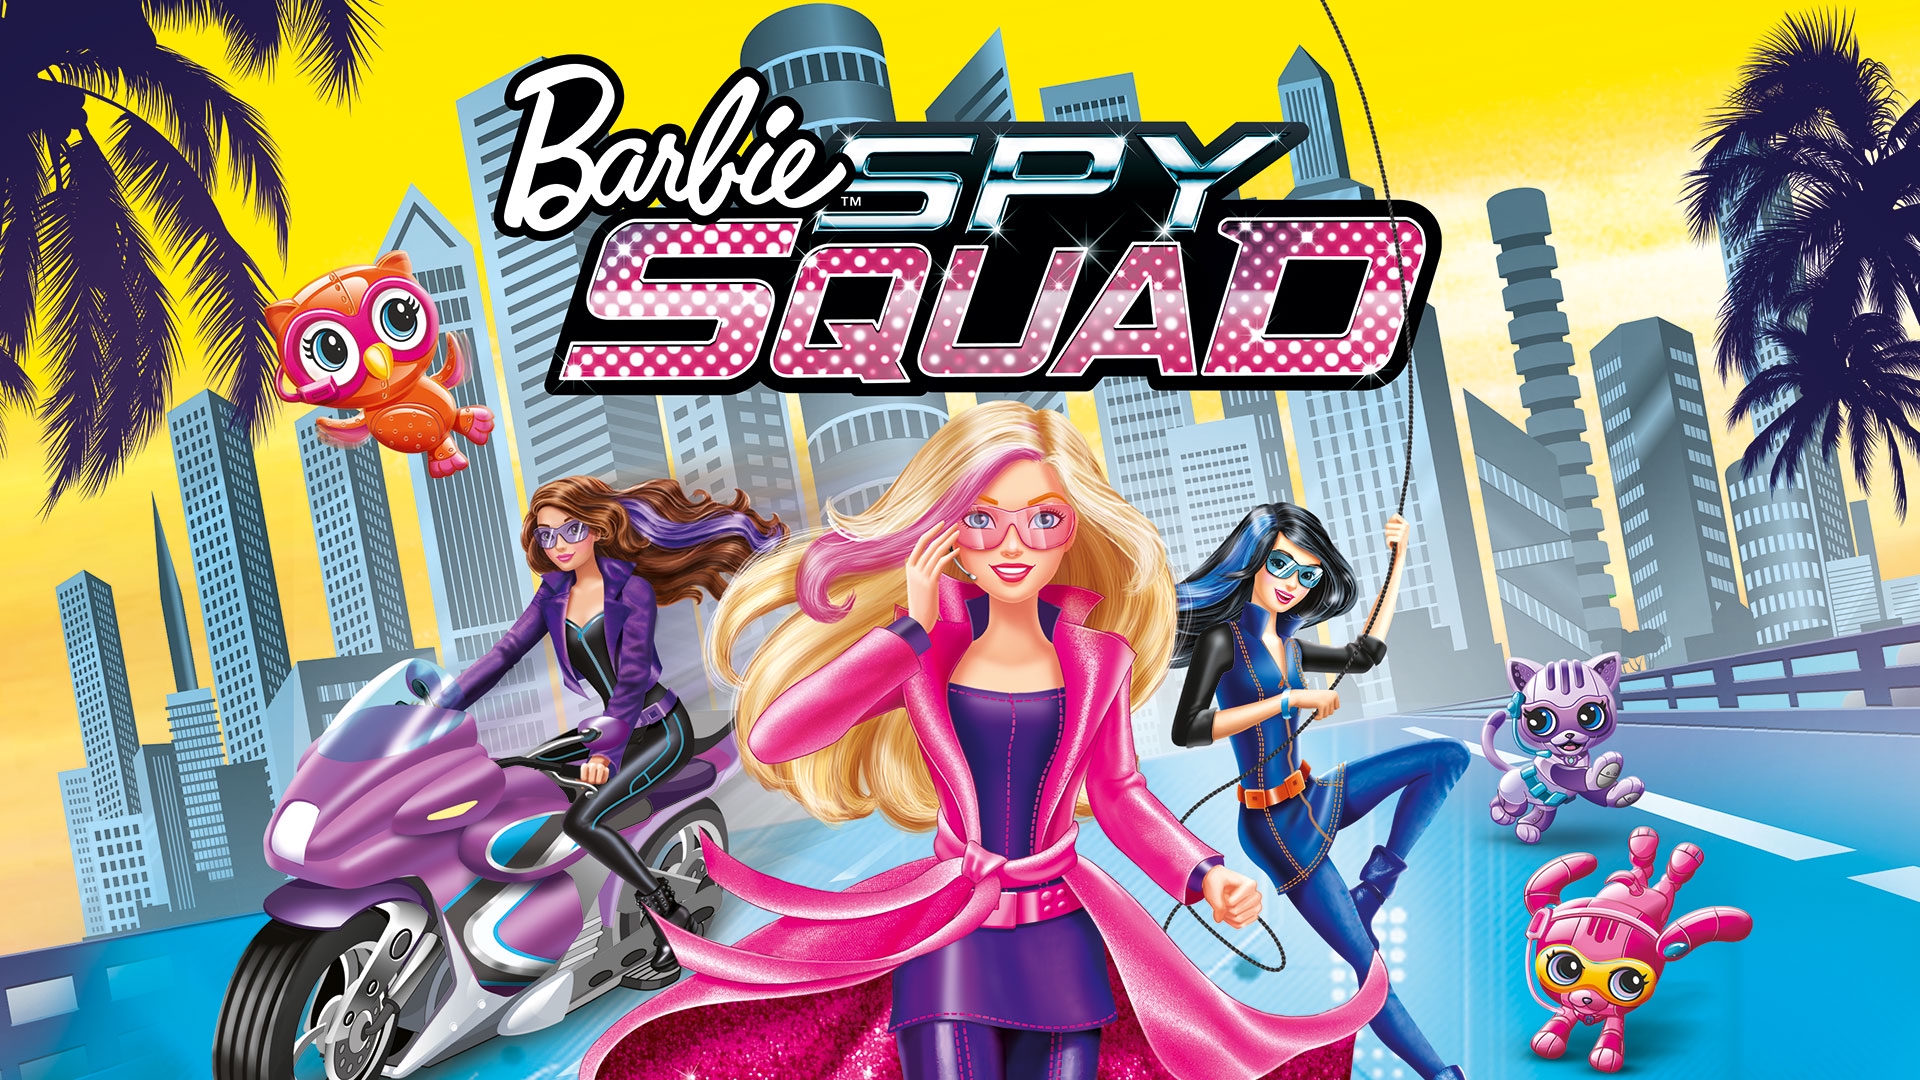 Stream Barbie Spy Squad Online. Download and Watch HD Movies